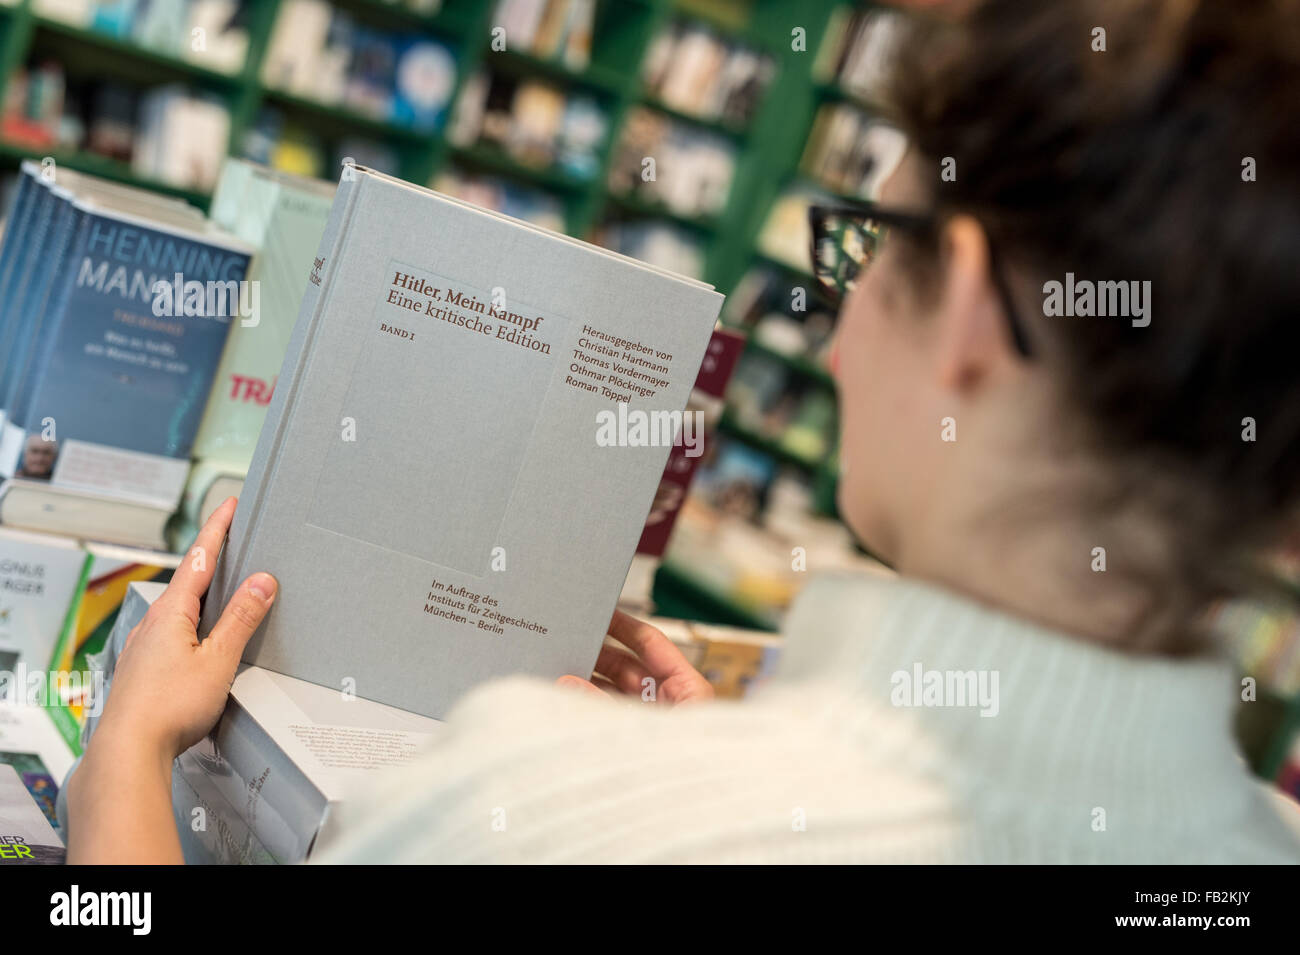 Munich, Germany. 8th Jan, 2016. ILLUSTRATION - Book seller Marie Katzlinger takes the first of two volumes of the annotated edition of 'Hitler, Mein Kampf - A criticial edition' into her hand in the Lehmkuhl bookshop . The 'Institut fuer Zeitgeschichte' (Institute for contemporary history) is presenting on the day of publication, the annotated edition of the 1924 original publication of the inflammatory pamphlet 'Mein Kampf', authored by national socialist dictator Adolf Hitler. Credit:  dpa picture alliance/Alamy Live News Stock Photo